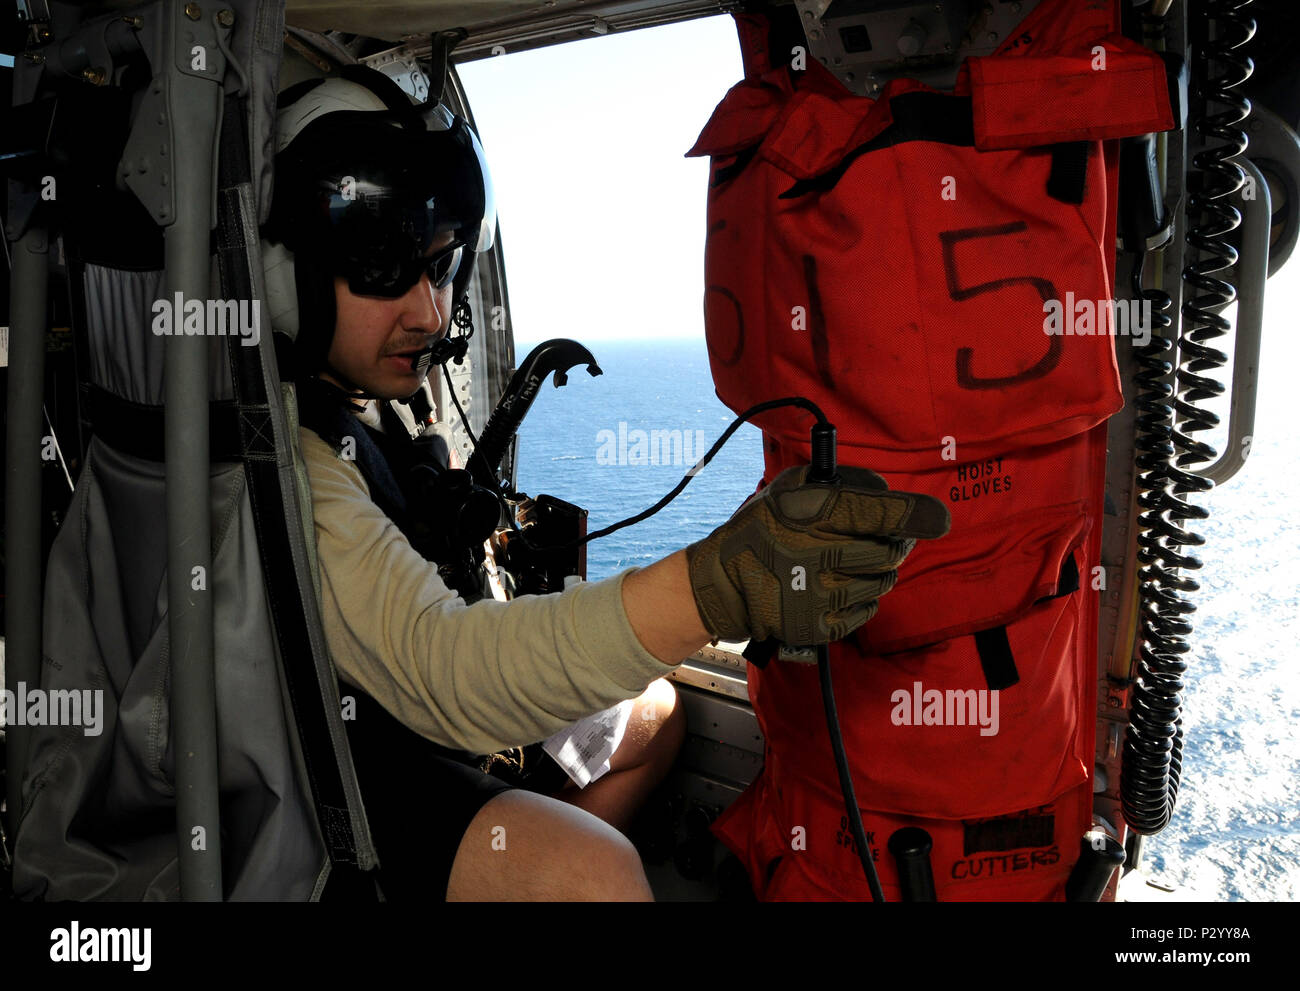 160812-N-XI307-498 ATLANTIC OCEAN (Aug. 12, 2016) Naval Air Crewman (Helicopter) 3rd Class Dalton Gonzales prepares for search and rescue (SAR) training aboard an MH-60S helicopter attached to the 'Tridents' of Helicopter Sea Combat Squadron (HSC) 9. GHWB is underway conducting training and completing qualifications in preparation for a 2017 deployment. (U.S. Navy photo by Mass Communication Specialist 2nd Class Ryan Seelbach/Released) Stock Photo